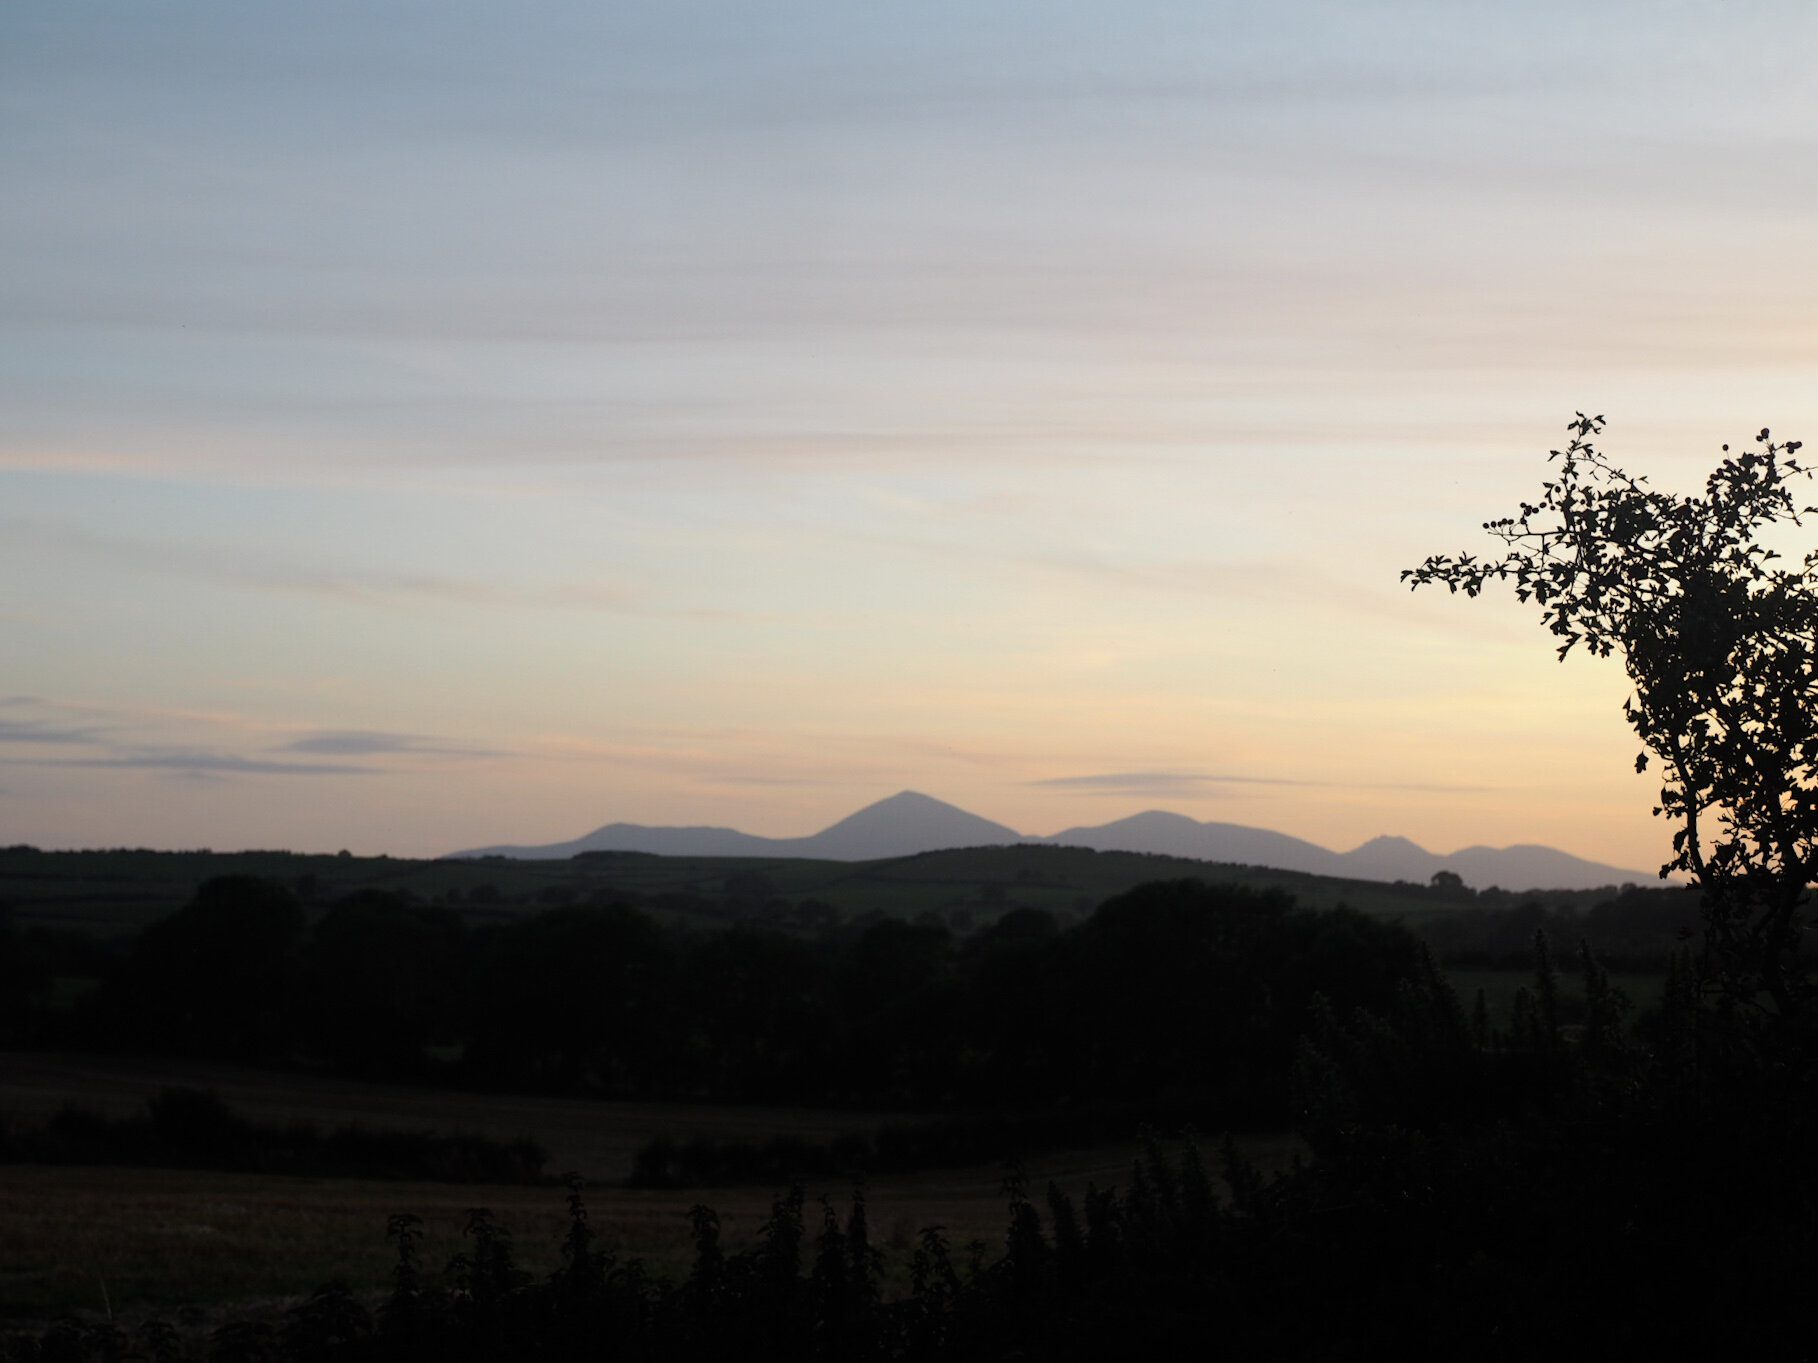 Ballynoe Stone Circle sunset view over the hills